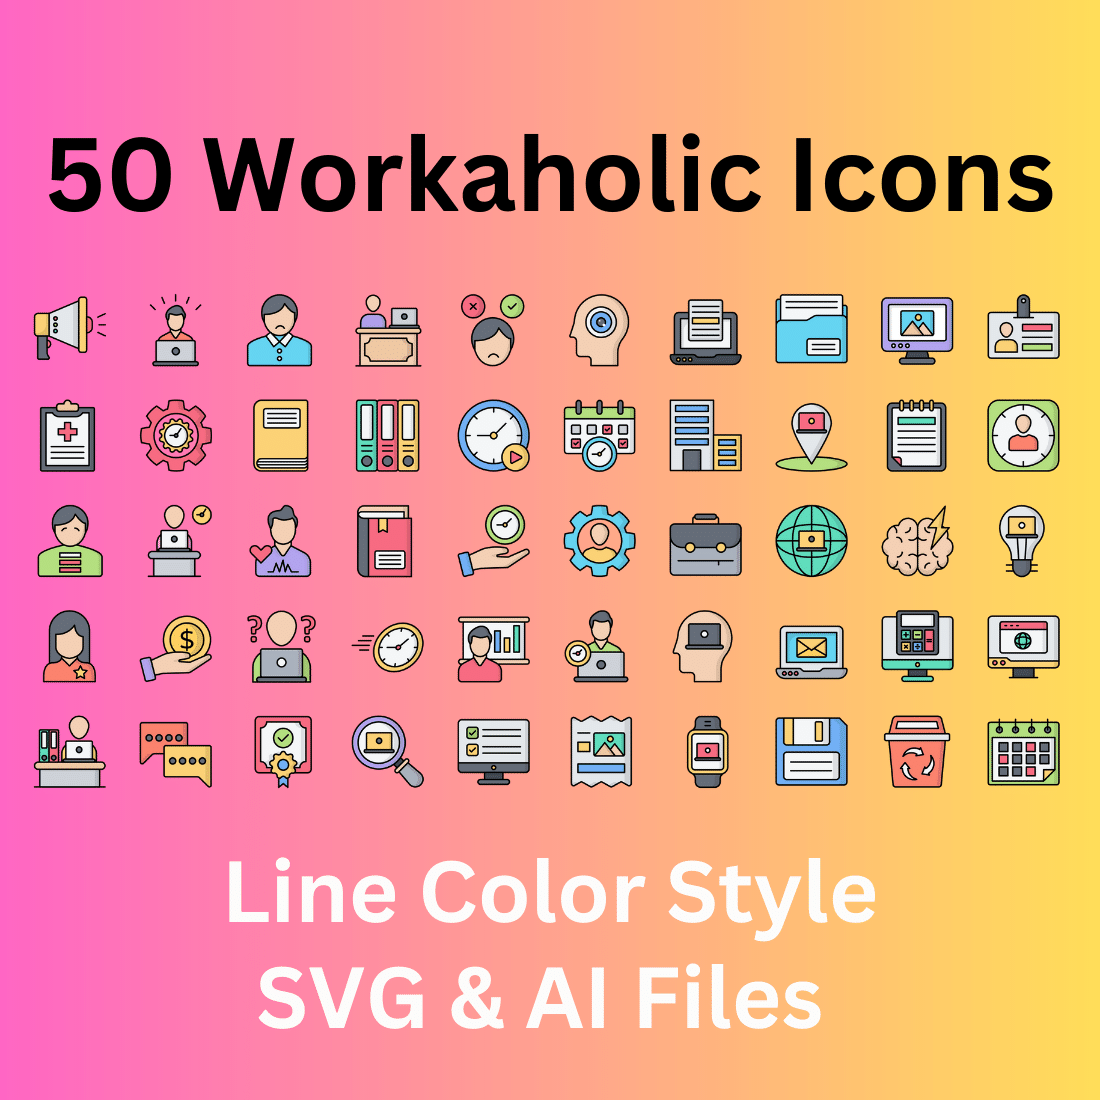 Workaholic Icon Set 50 Line Color Icons - SVG And AI Files cover image.